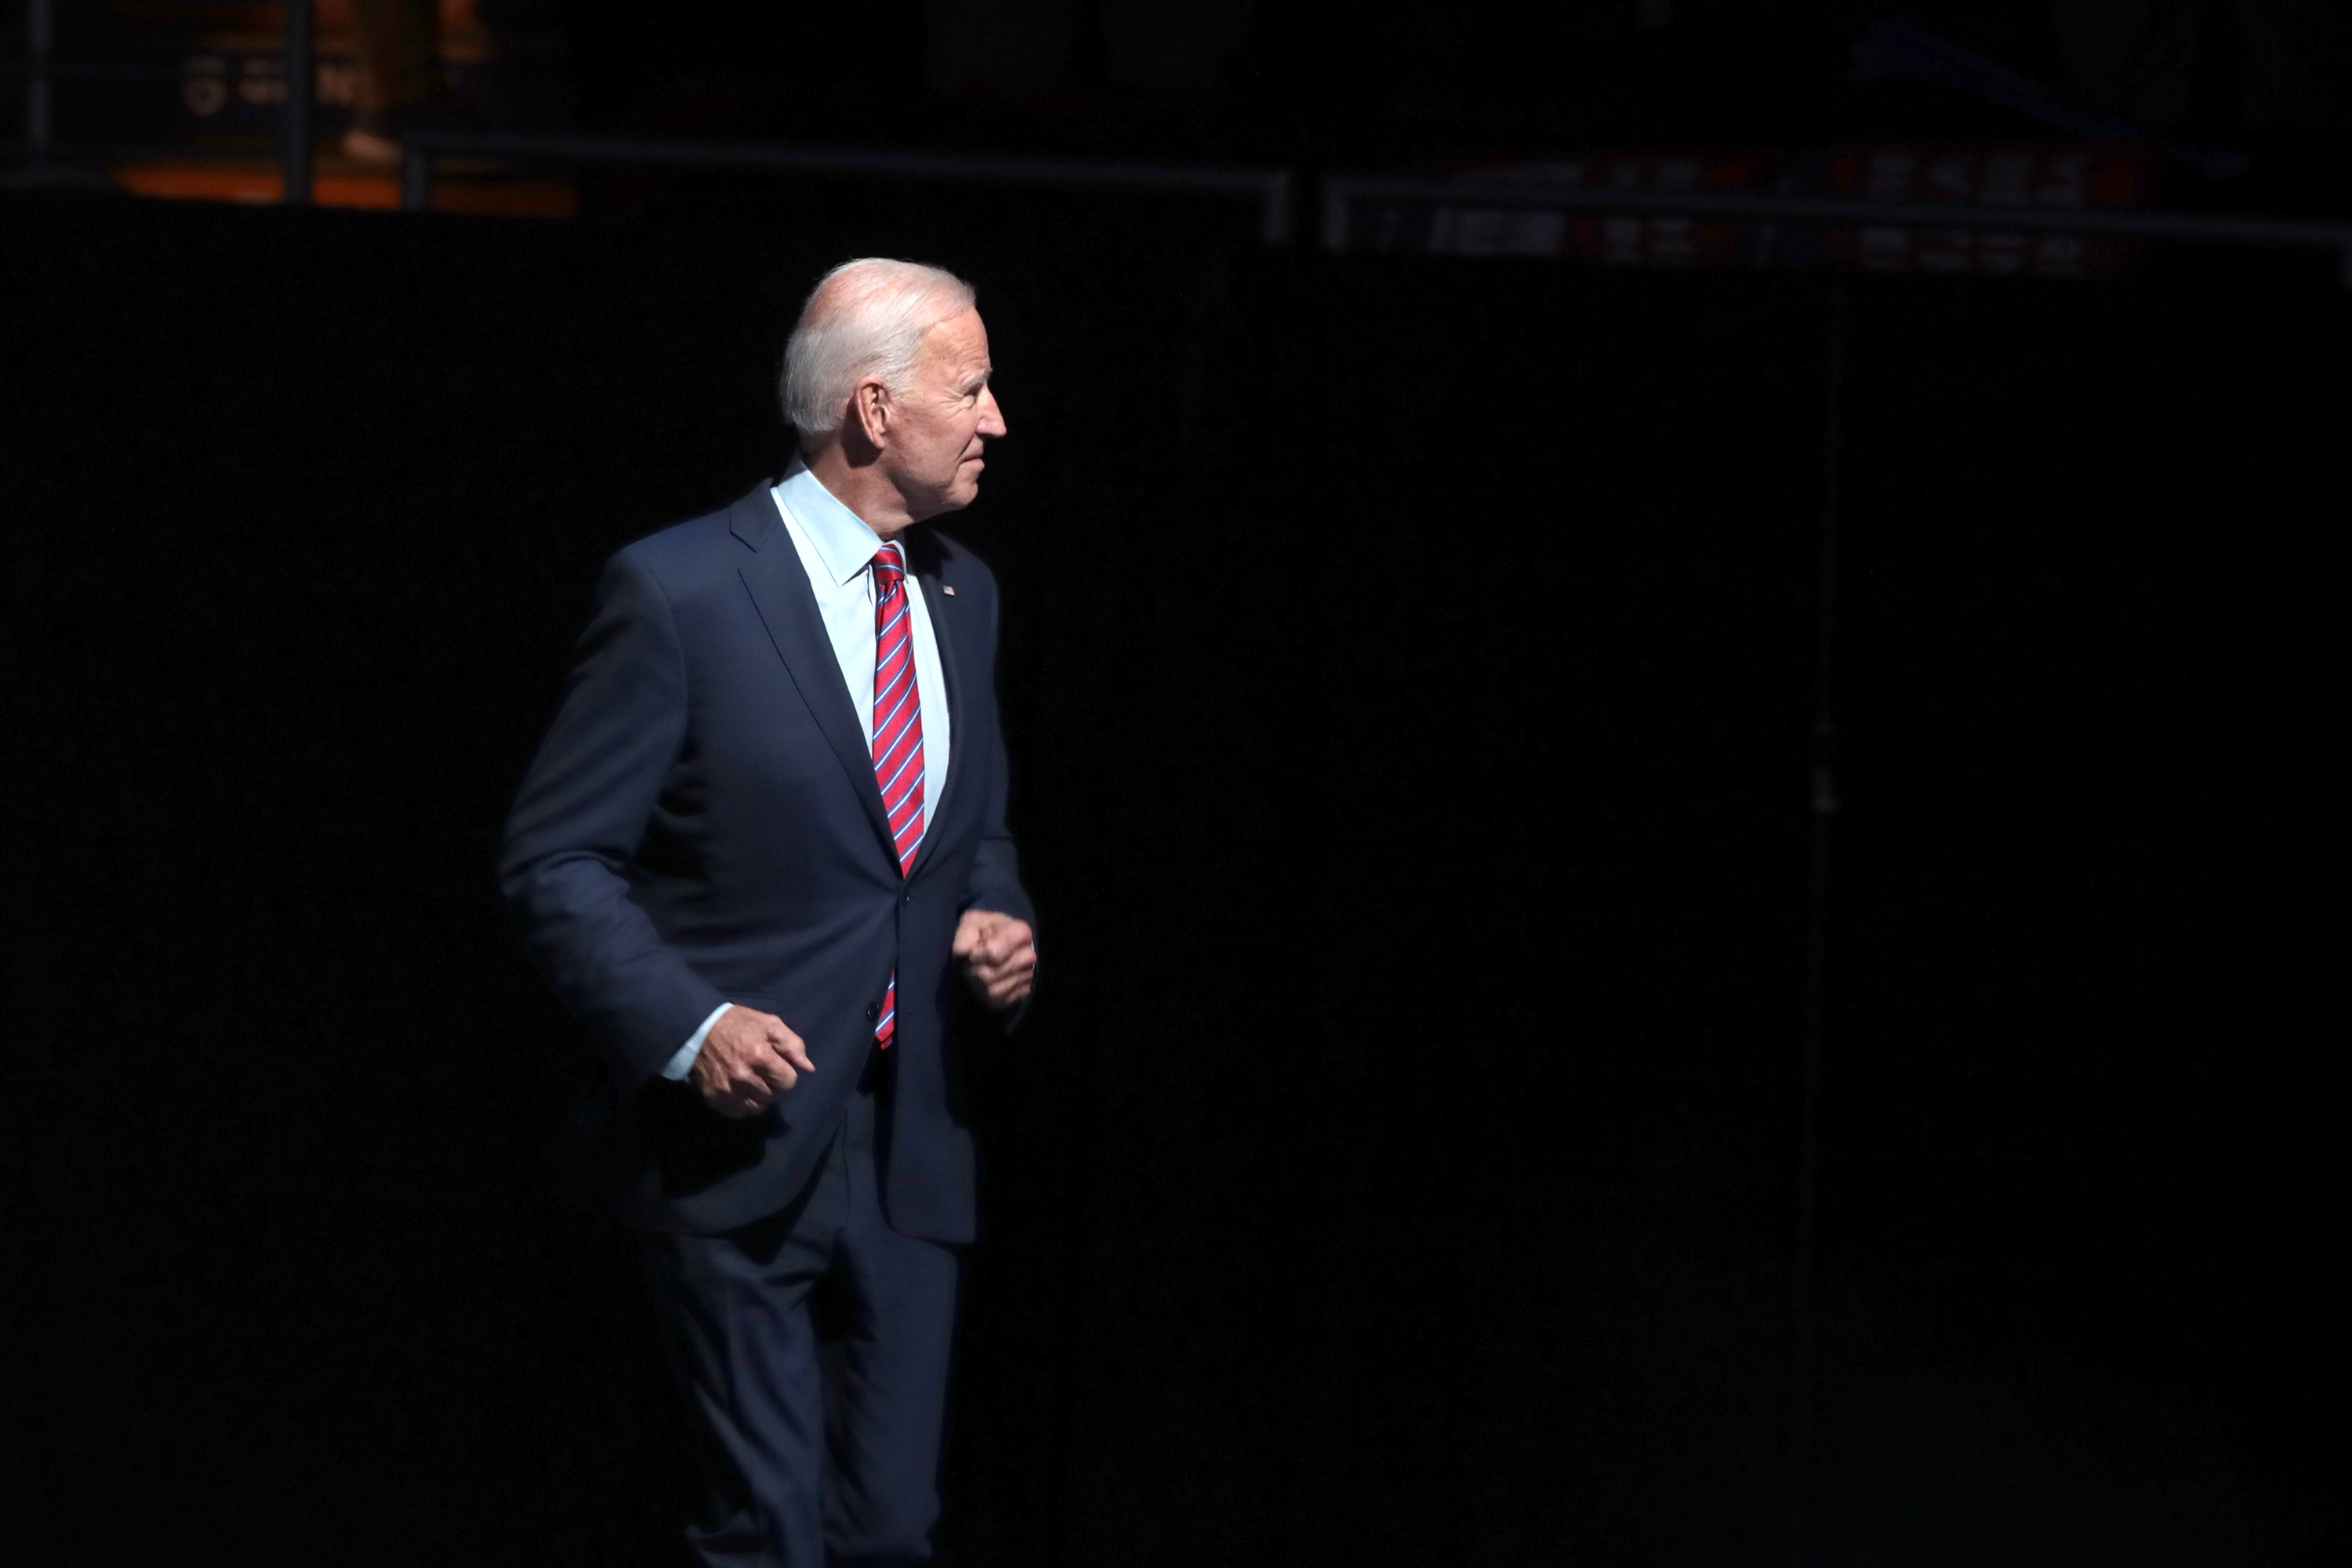 Democratic presidential candidate, former Vice President Joe Biden speaks at the Liberty and Justice Celebration at the Wells Fargo Arena on November 01, 2019 in Des Moines, Iowa. 